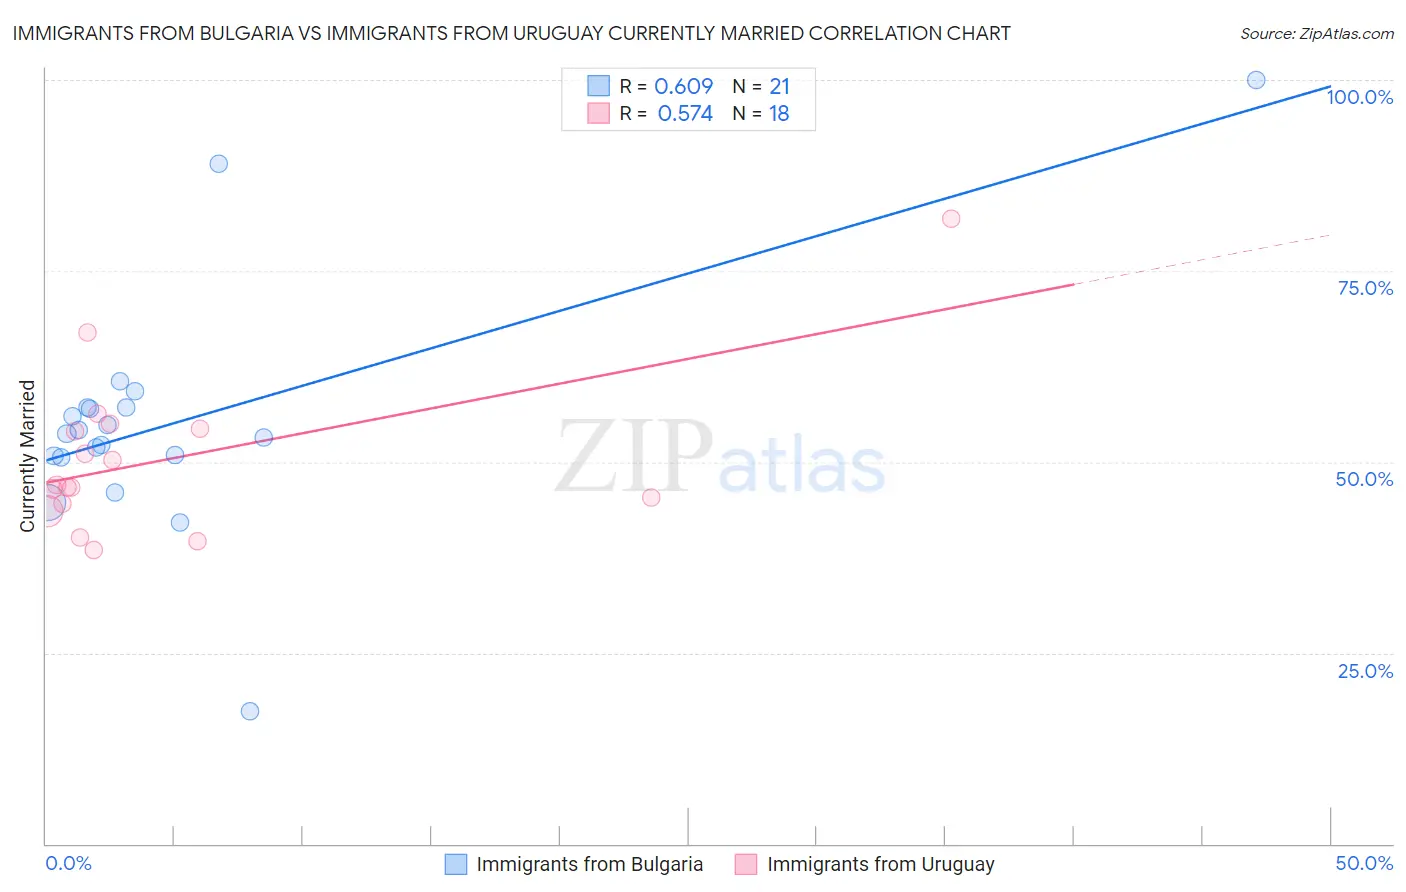 Immigrants from Bulgaria vs Immigrants from Uruguay Currently Married